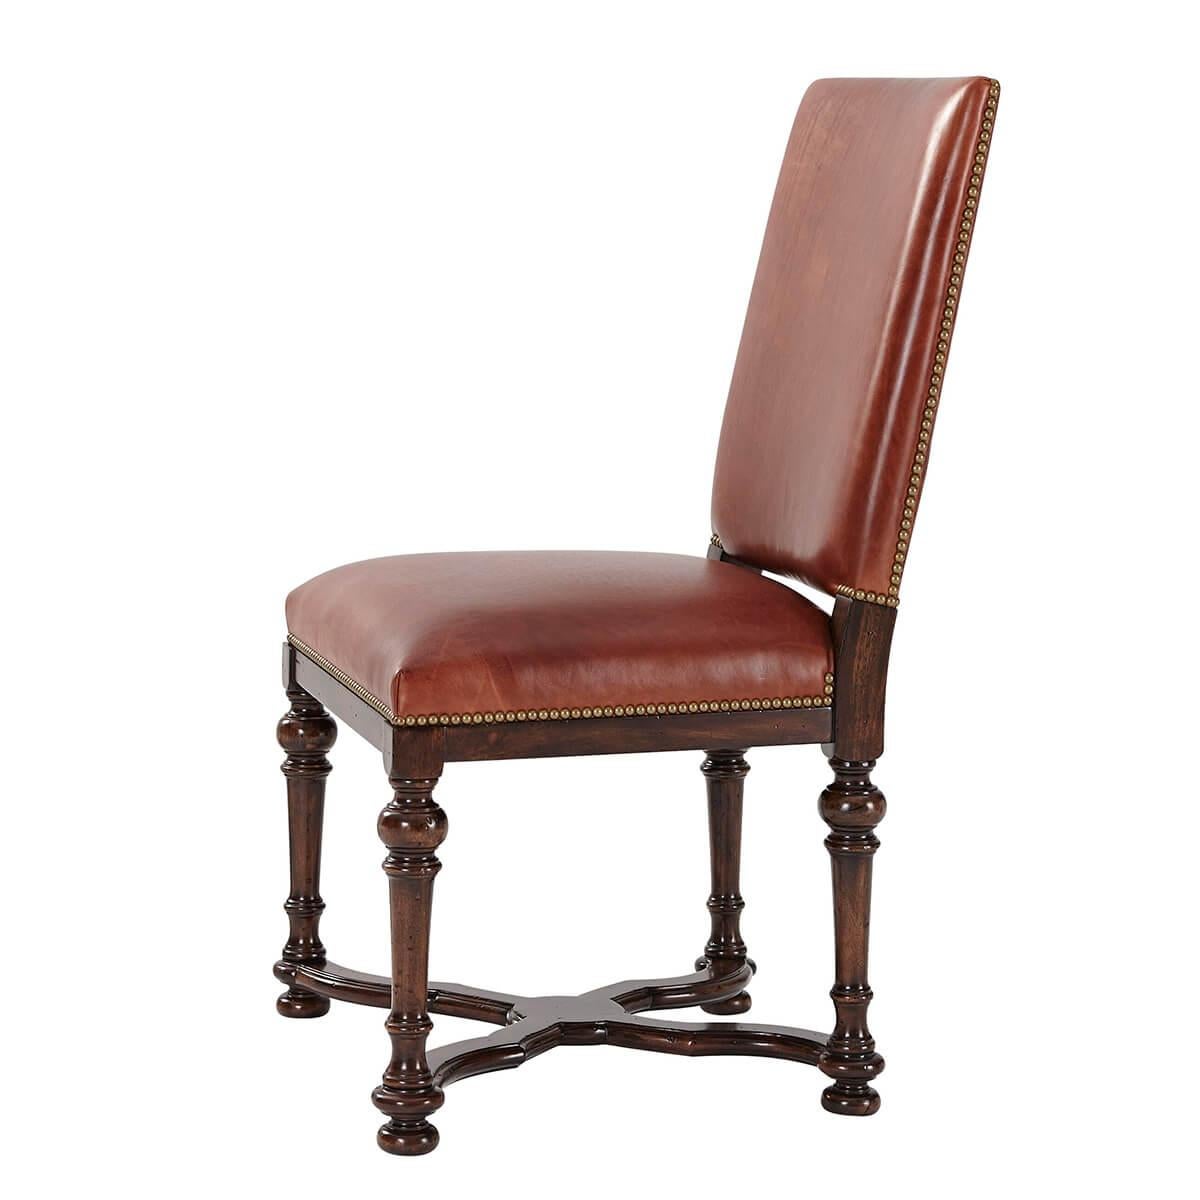 An early English William and Mary style hand-carved side chair, with a rectangular padded back and an upholstered seat on turned tapering legs joined by a wavy ‘X’ stretcher.
Dimensions: 23